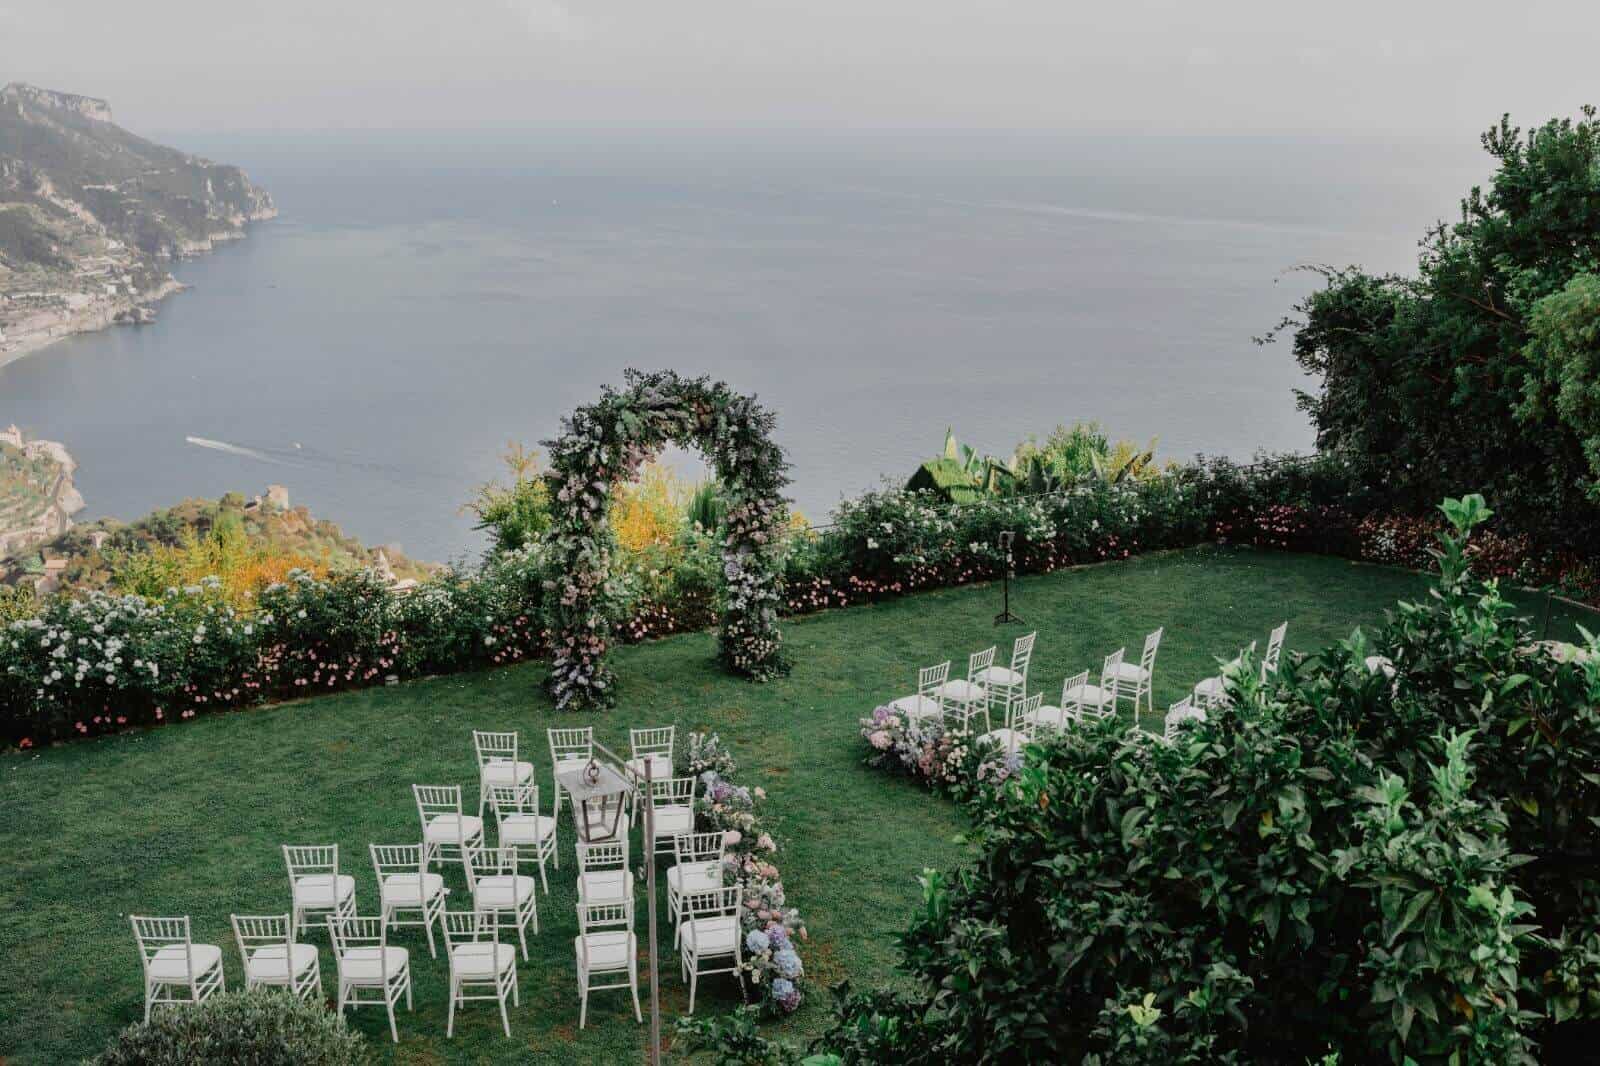 Garden of Hotel Belmond Caruso in Ravello Set up for the wedding